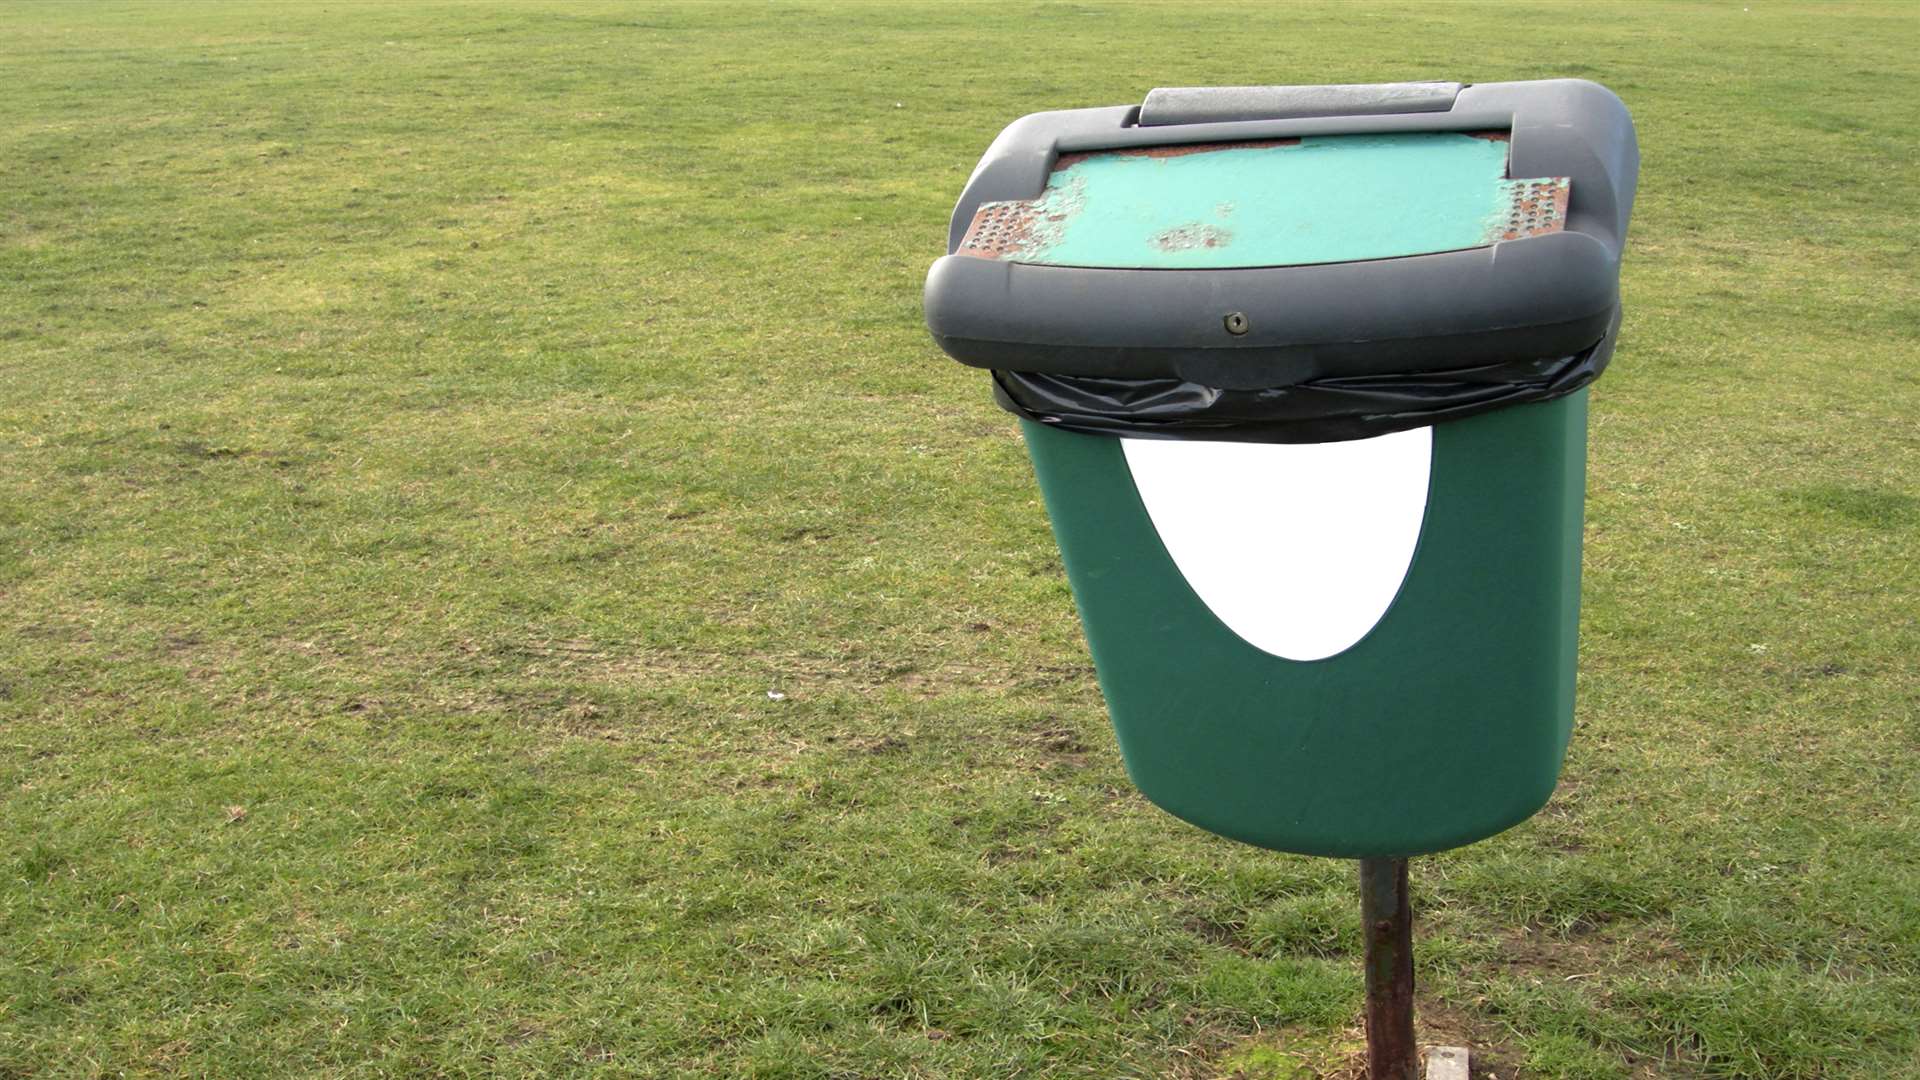 Dog waste bins for pet owners to dispose of their waste during walks